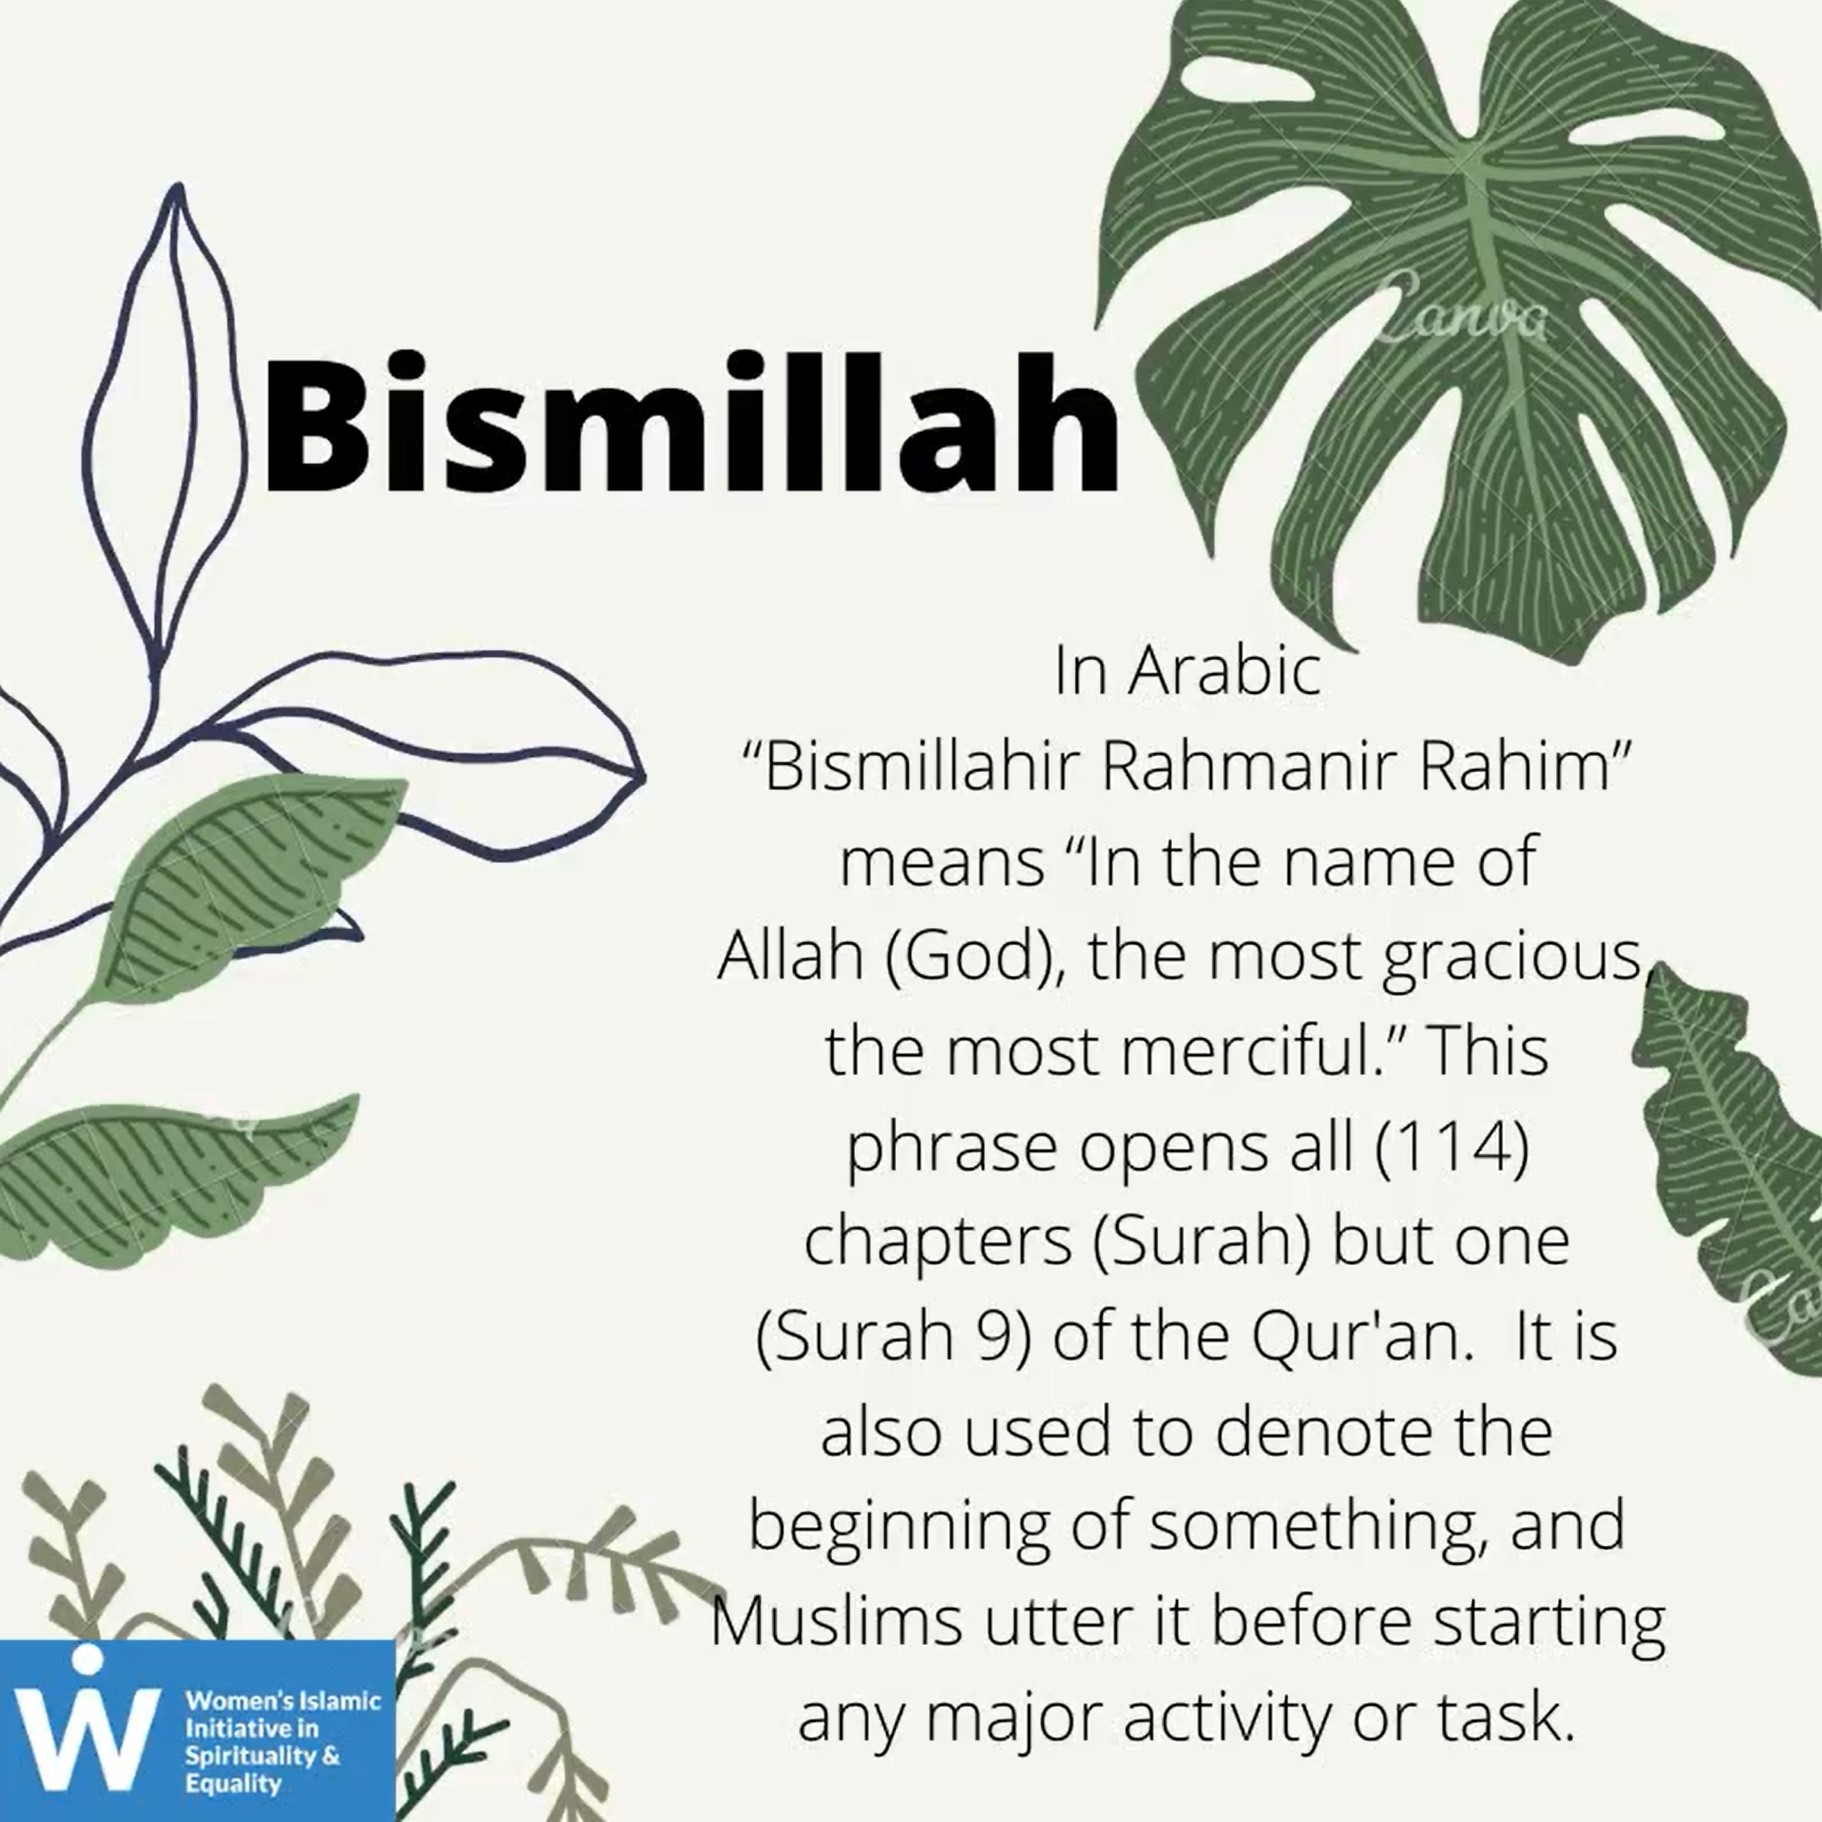 &quot;Bismillah: In Arabic “Bismillahir Rahmanir Rahim” means “In the name of Allah (God), the most gracious, the most merciful.” This phrase opens all (114) chapters (Surah) but one (Surah 9) of the Qur'an. It is also used to denote the beginning of something, and Muslims utter it before starting any major activity or task.&quot;